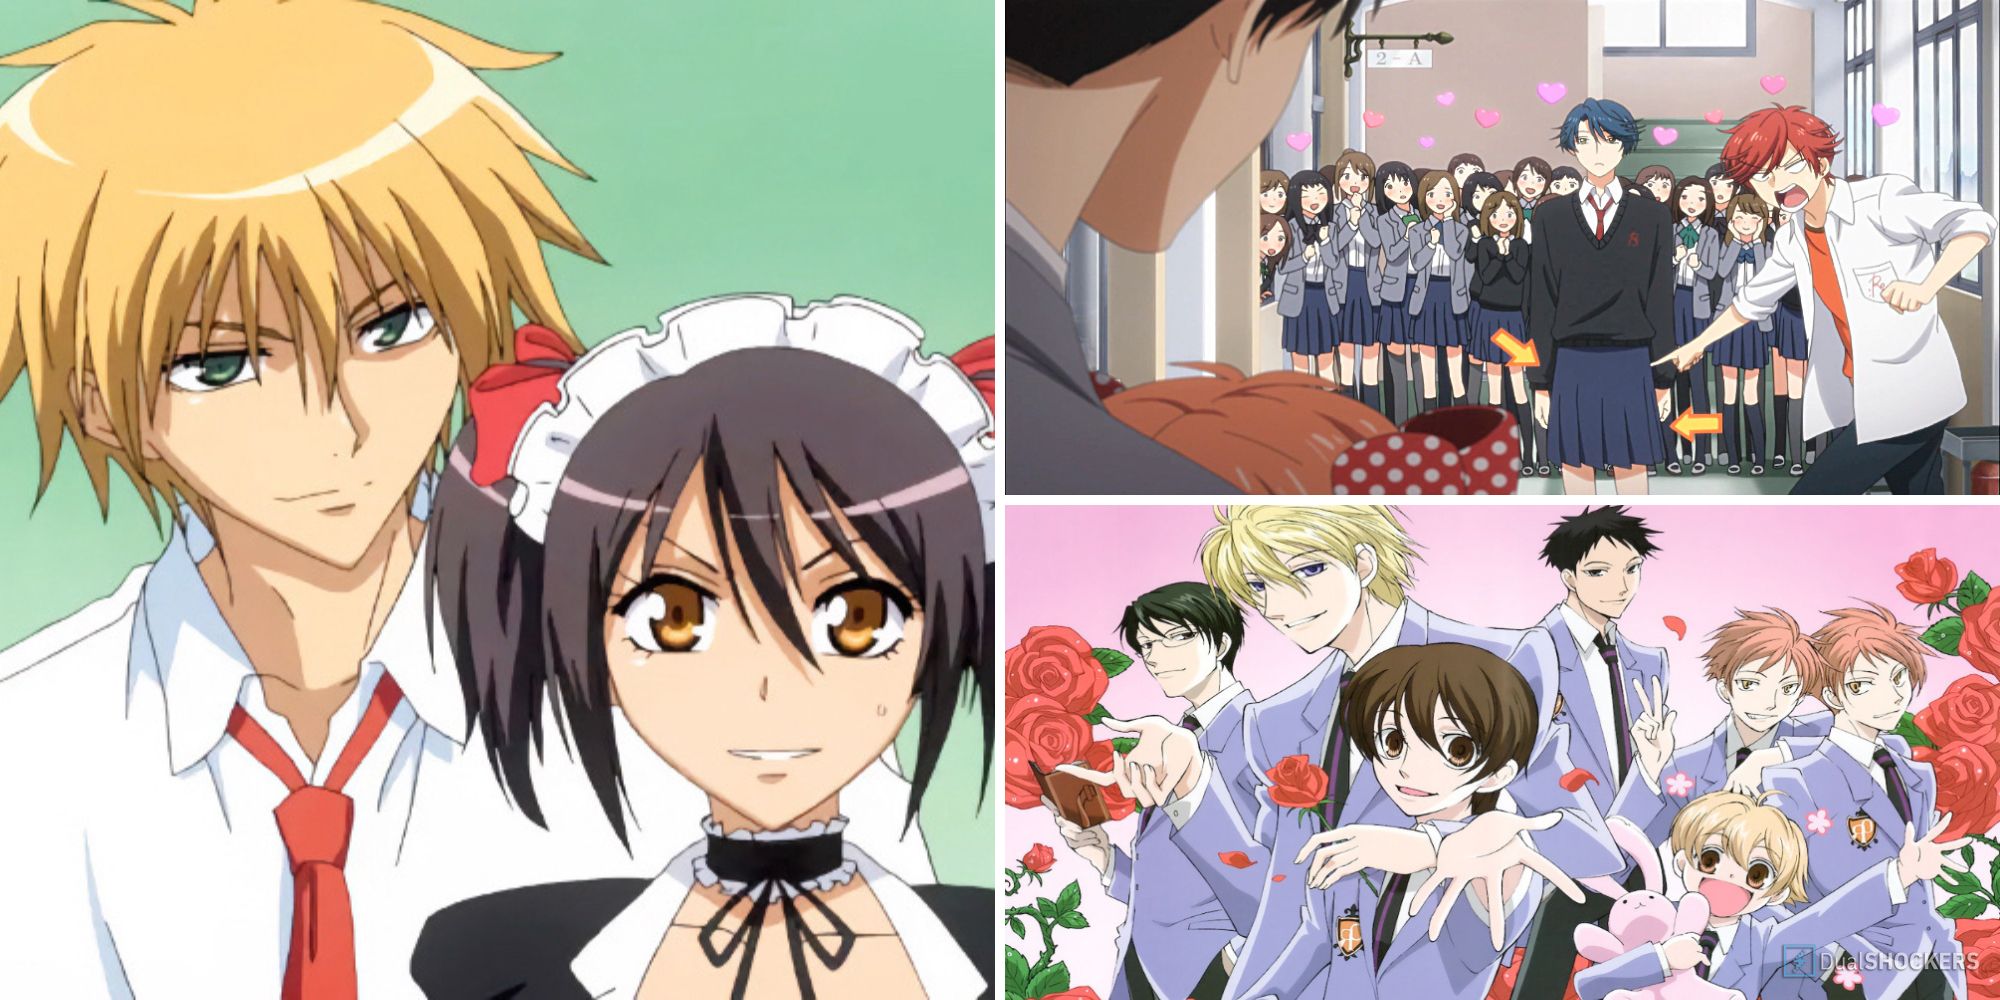 7 Best Reverse Harem Romcom Anime Recommendations with Light-hearted  Stories - Full of Comedy Elements